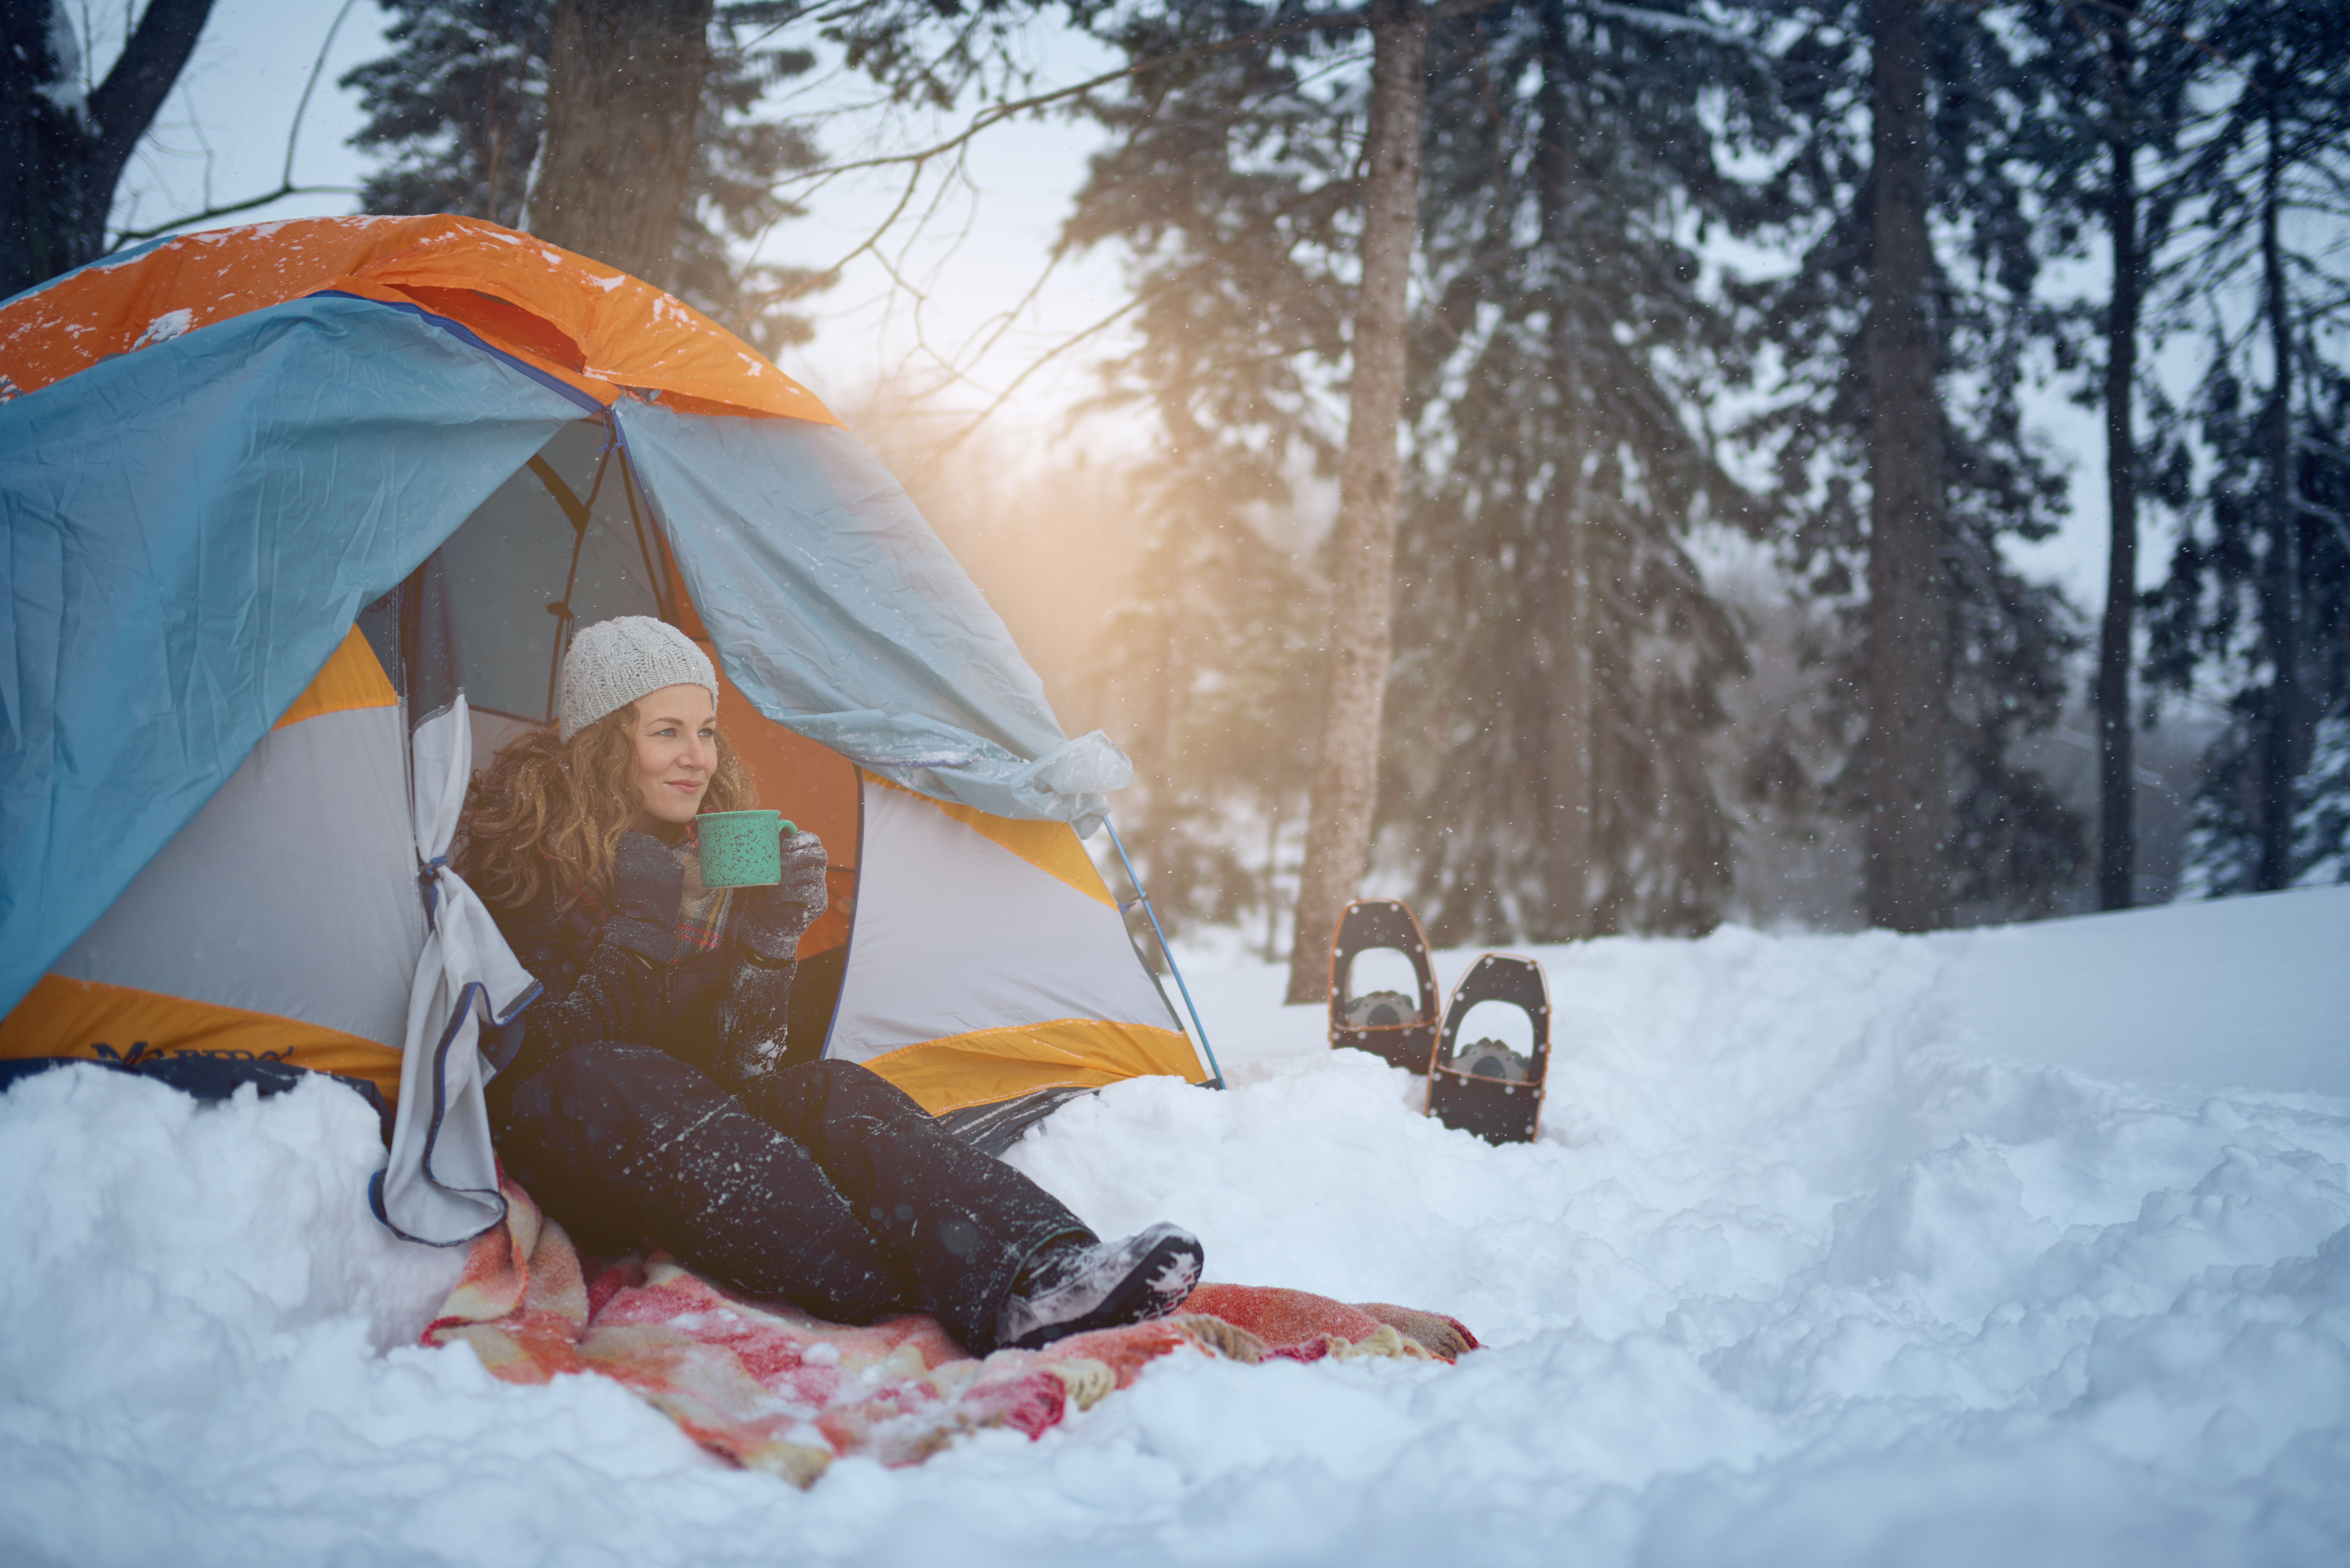 Ontario winter camping ideas that outdoor lovers should know about